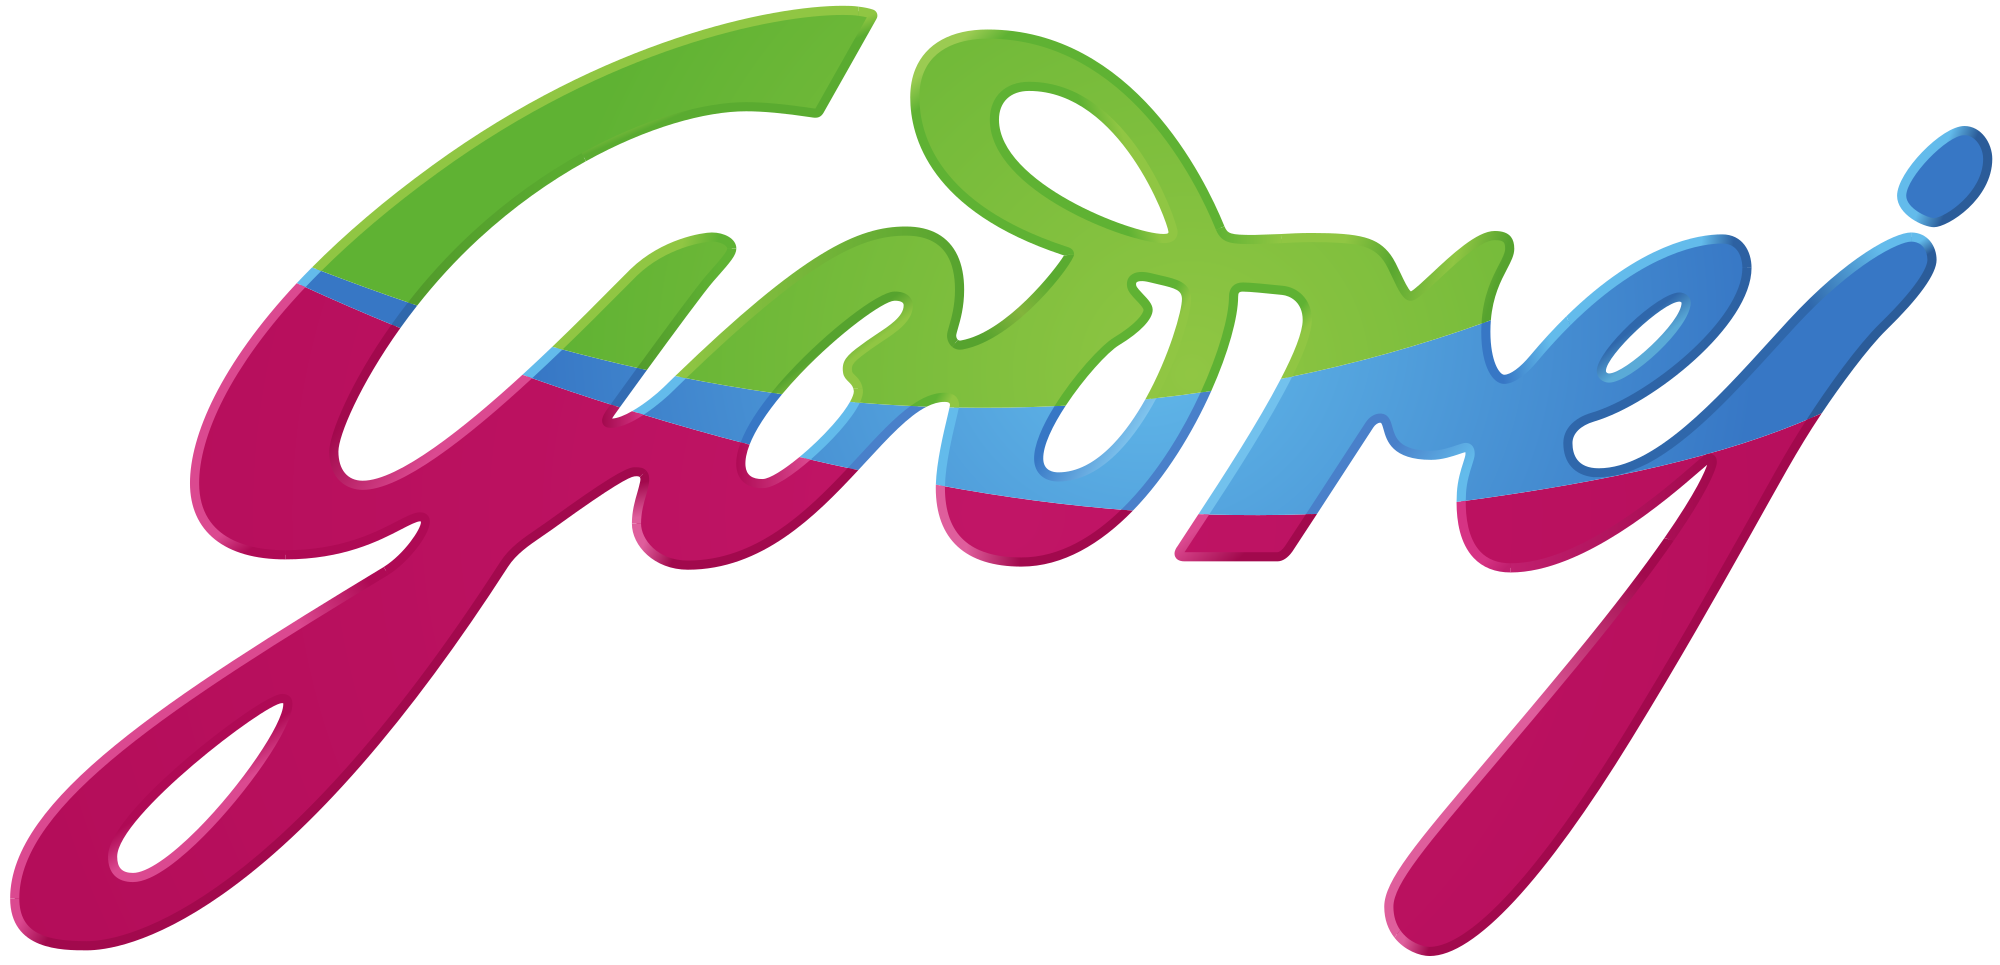 Godrej Masterbrand Along With Four Other Godrej Brands Ranked as the Most Trusted Brands of India by Trust Research Advisory's Brand Trust Report 2019